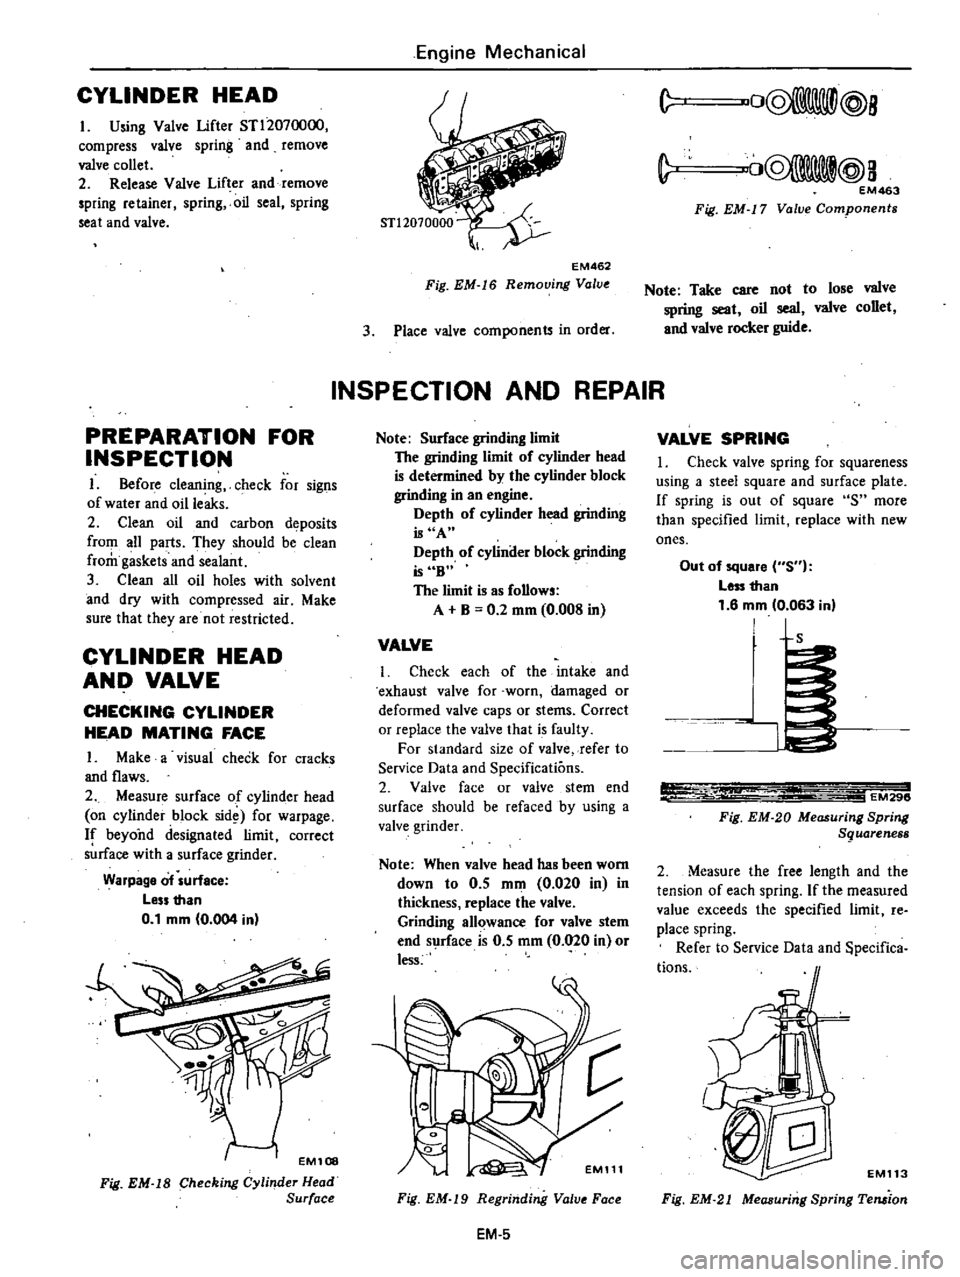 DATSUN 210 1979  Service Manual 
CYLINDER 
HEAD

I

Using 
Valve 
lifter 
STl2070000

compress 
valve

spring 
and 
remove

valve 
collet

2

Release 
Valve 
Lifter 
and 
remove

spring 
retainer

spring 
oil 
seal

spring

seat 
an